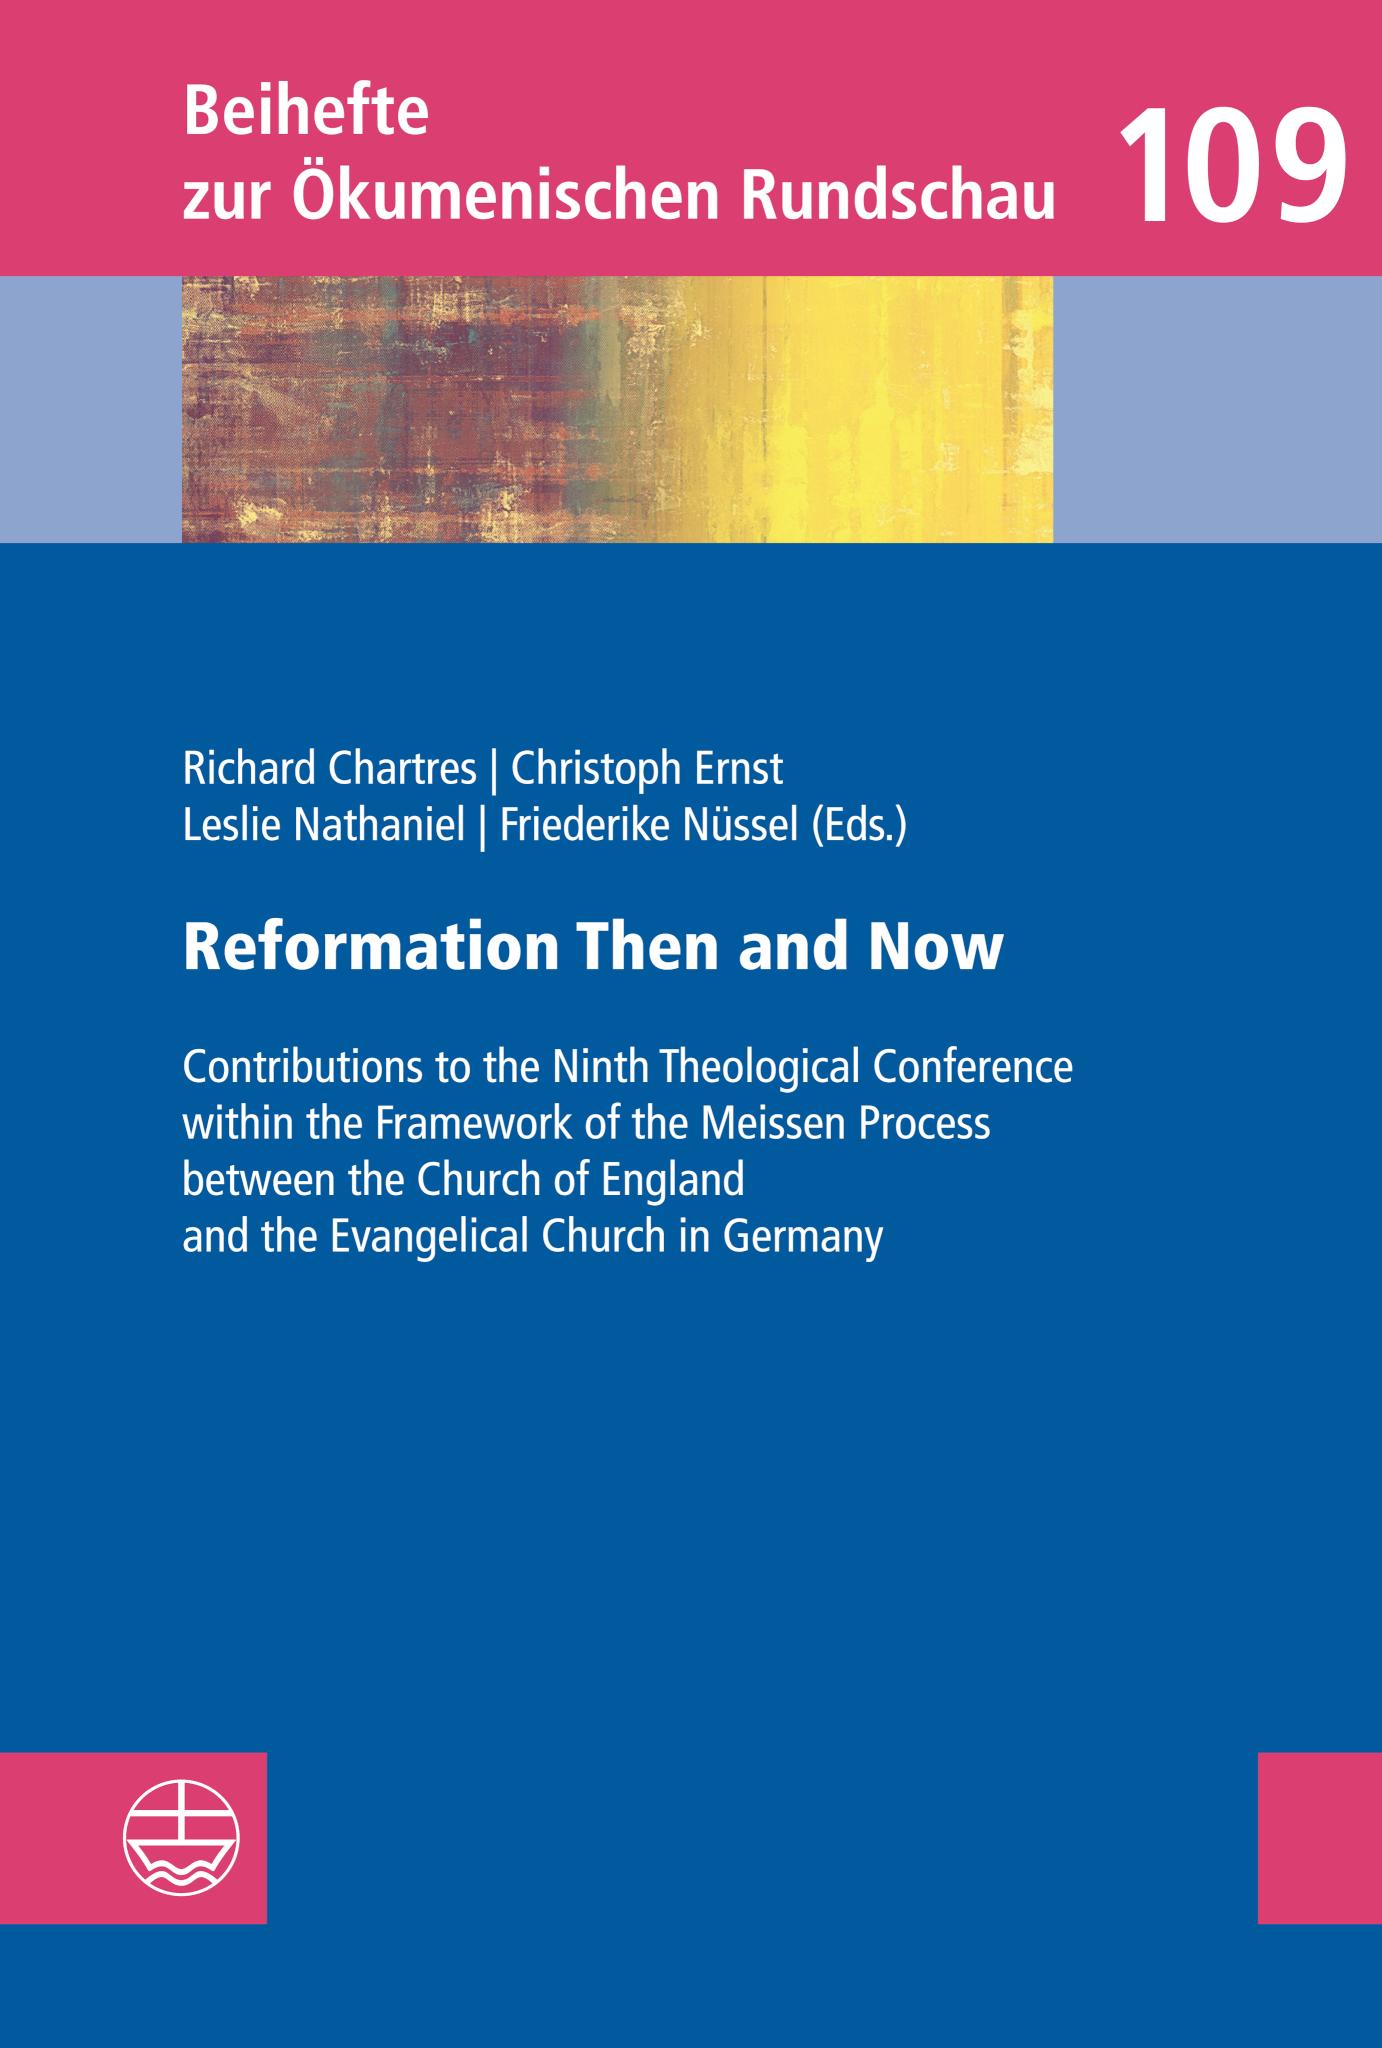 Reformation Then and Now Contributions to the Ninth Theological Conference within the Framework of the Meissen Process between the Church of England and the Evangelical Church in Germany